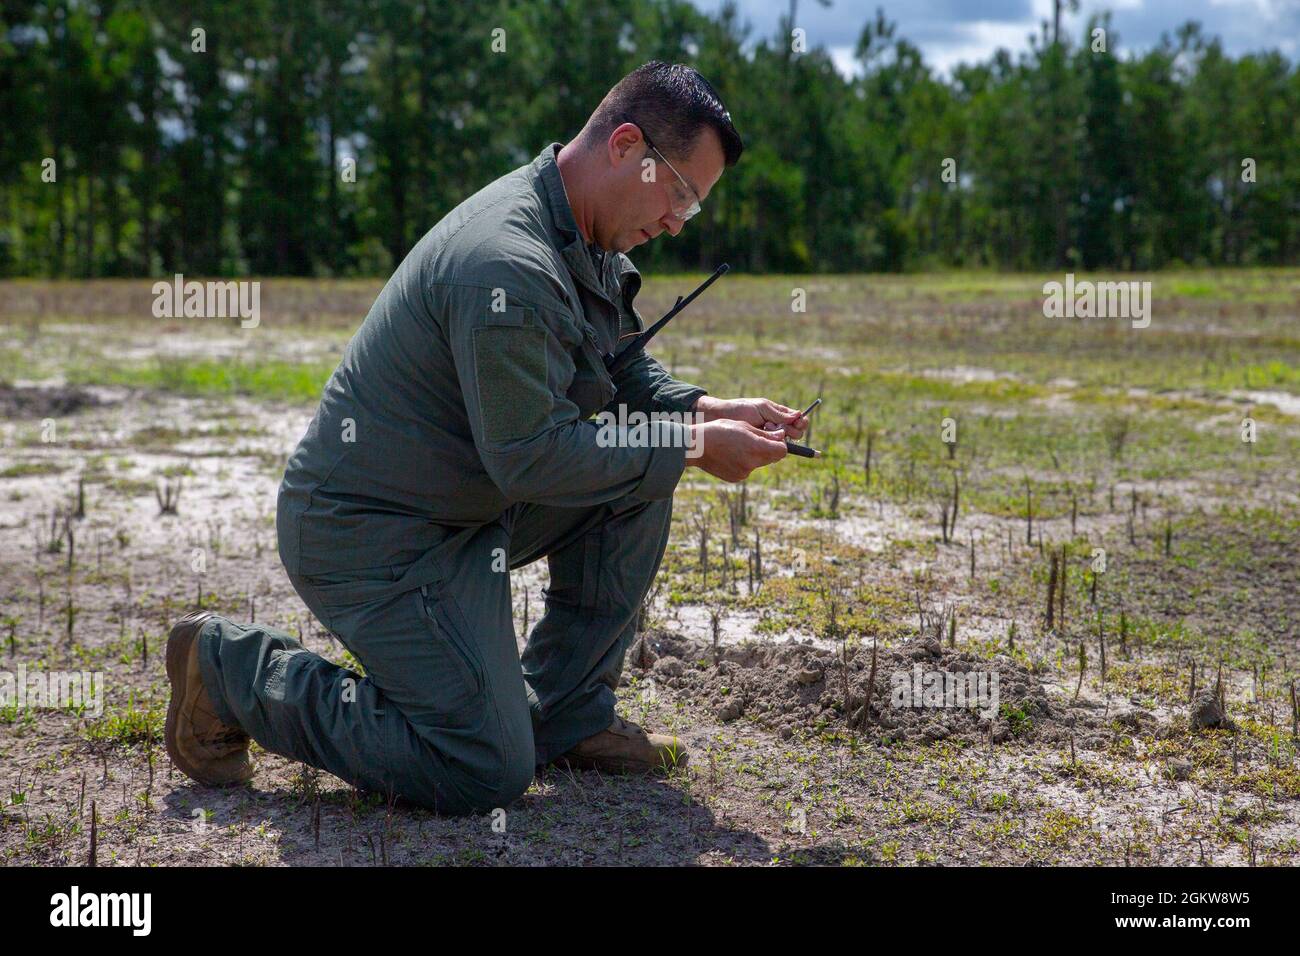 U.S. Marine Corps Master Sgt. Carlos Villarreal, an Explosive Ordnance Disposal (EOD) technician with Headquarters and Headquarters Squadron, prepares homemade explosives for a post blast analysis training event on Marine Corps Air Station Cherry Point, North Carolina, July 7, 2021. The explosives were detonated and analyzed to increase proficiency in identifying Improvised Explosive Devices during EOD operations. Stock Photo